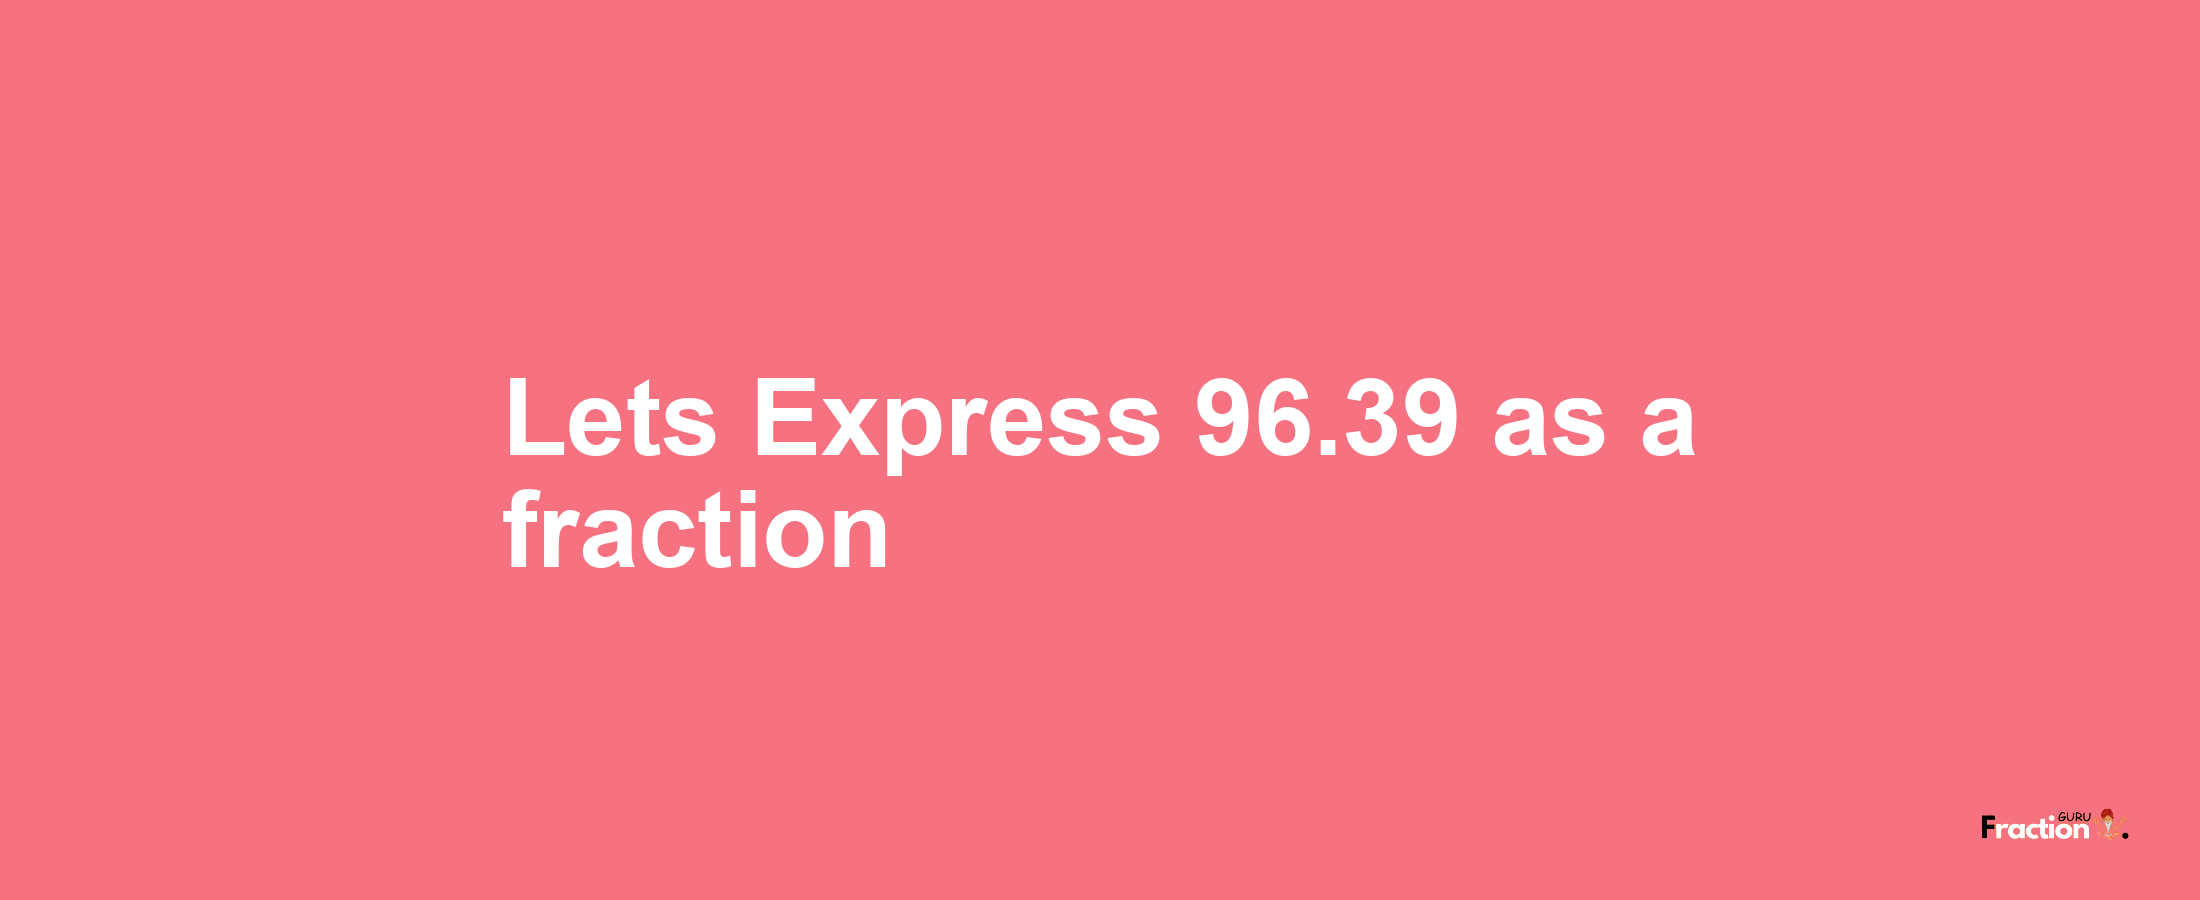 Lets Express 96.39 as afraction